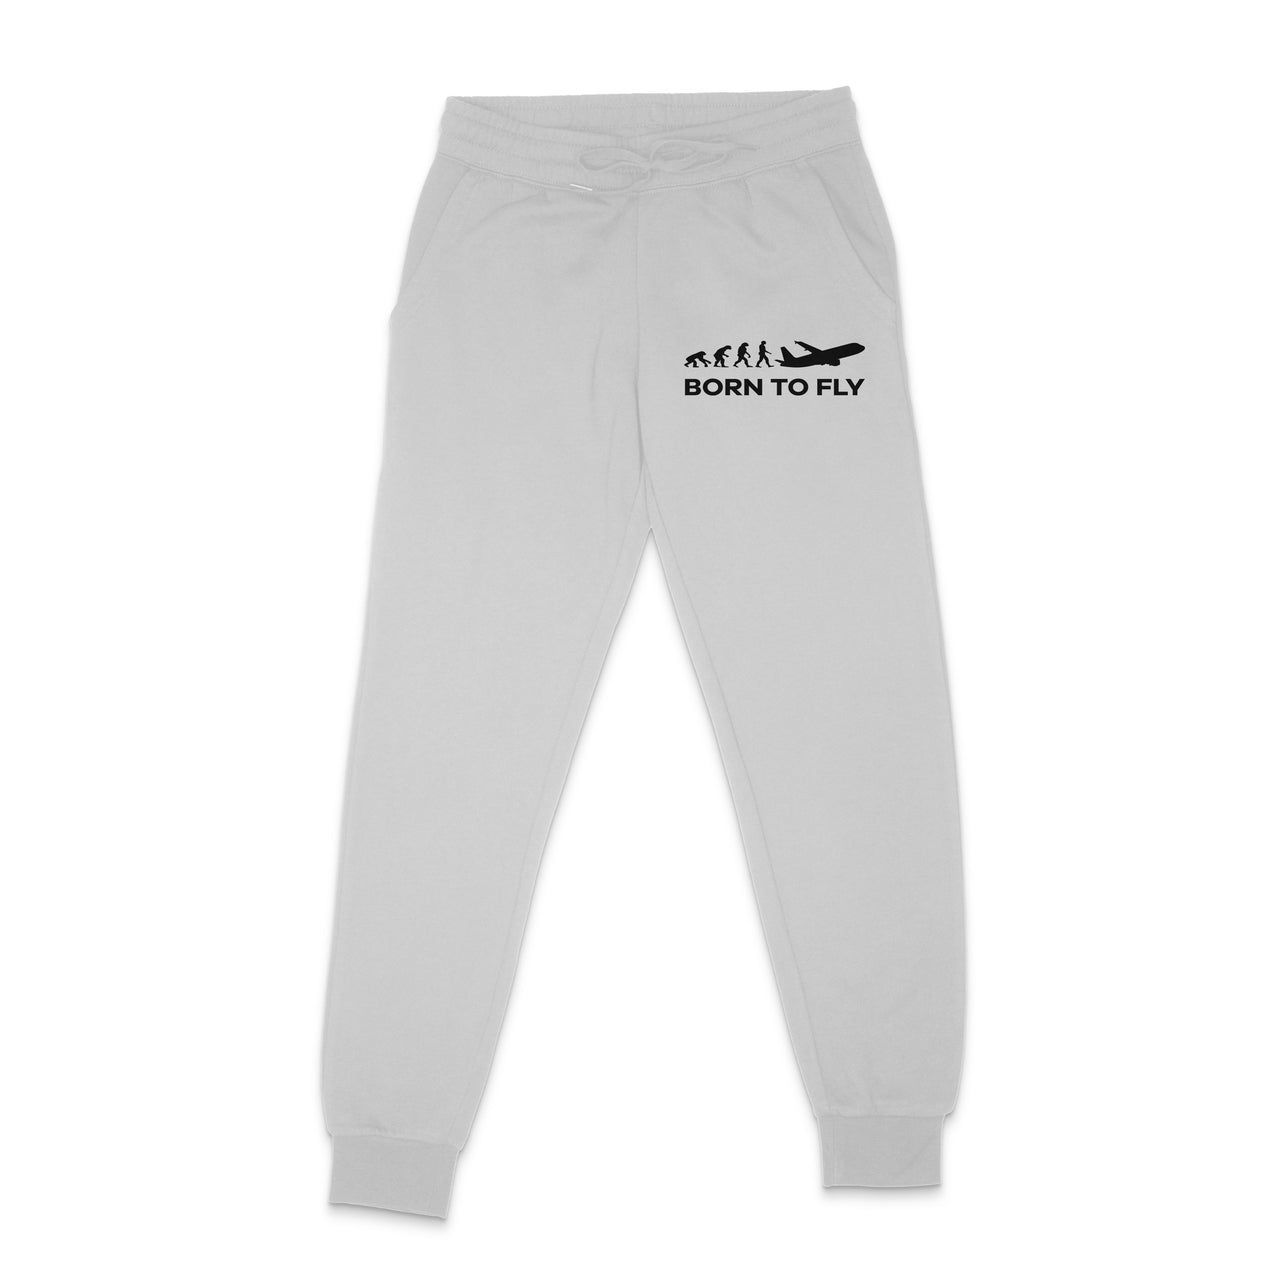 Born To Fly Designed Sweatpants